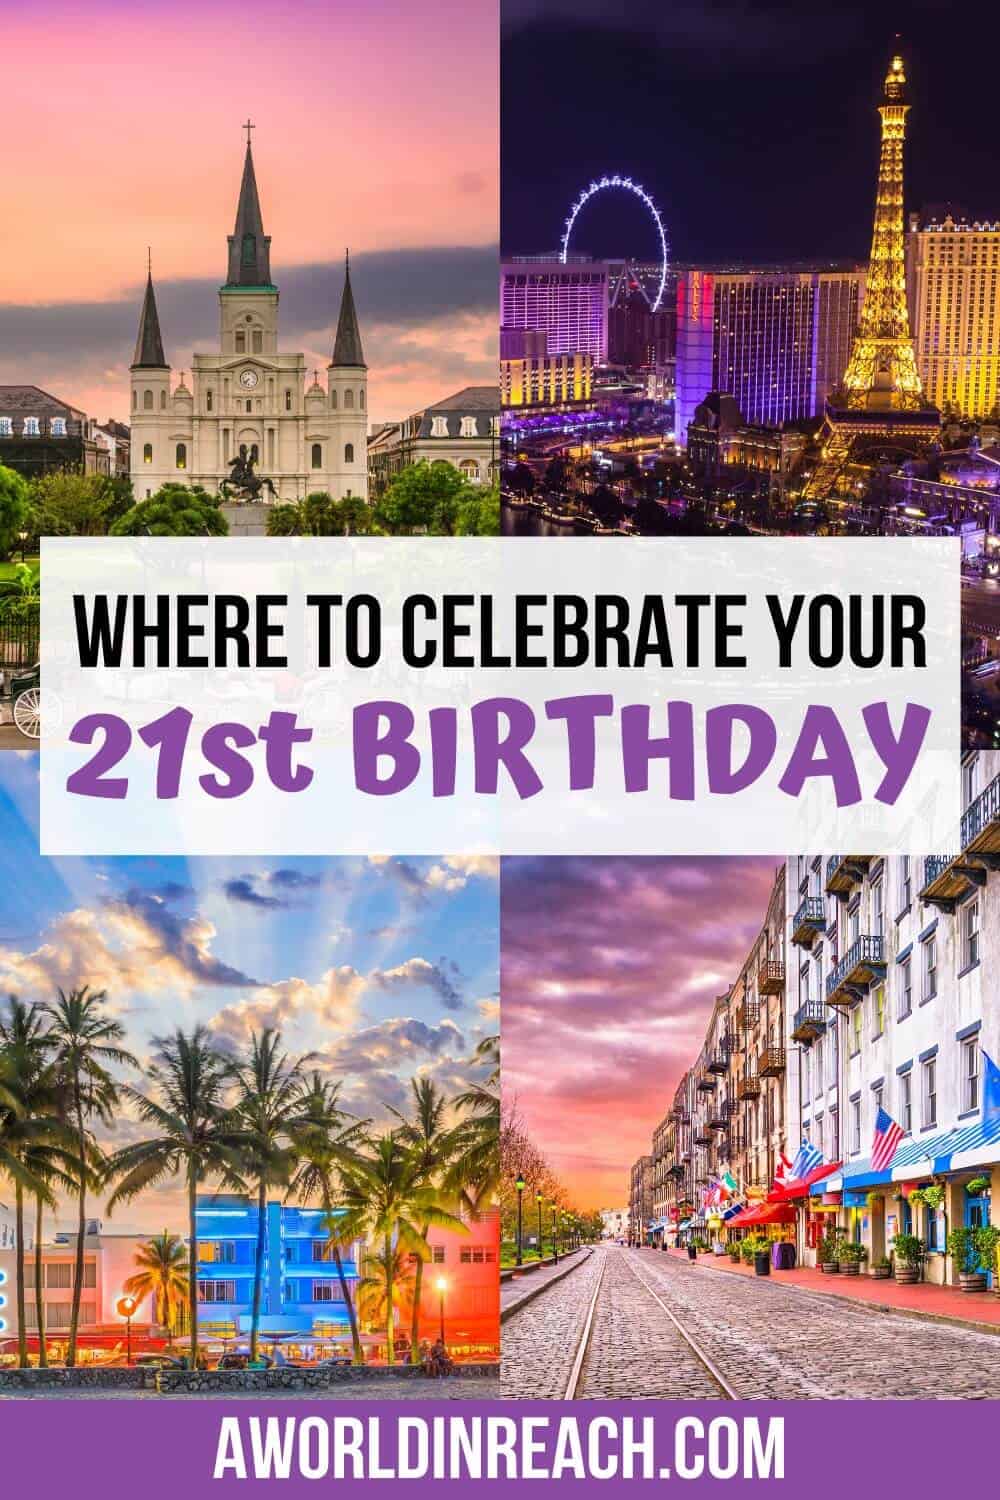 Pinterest Image: Where to Celebrate Your 21st Birthday with New Orleans, Las Vegas, Miami, and Savannah